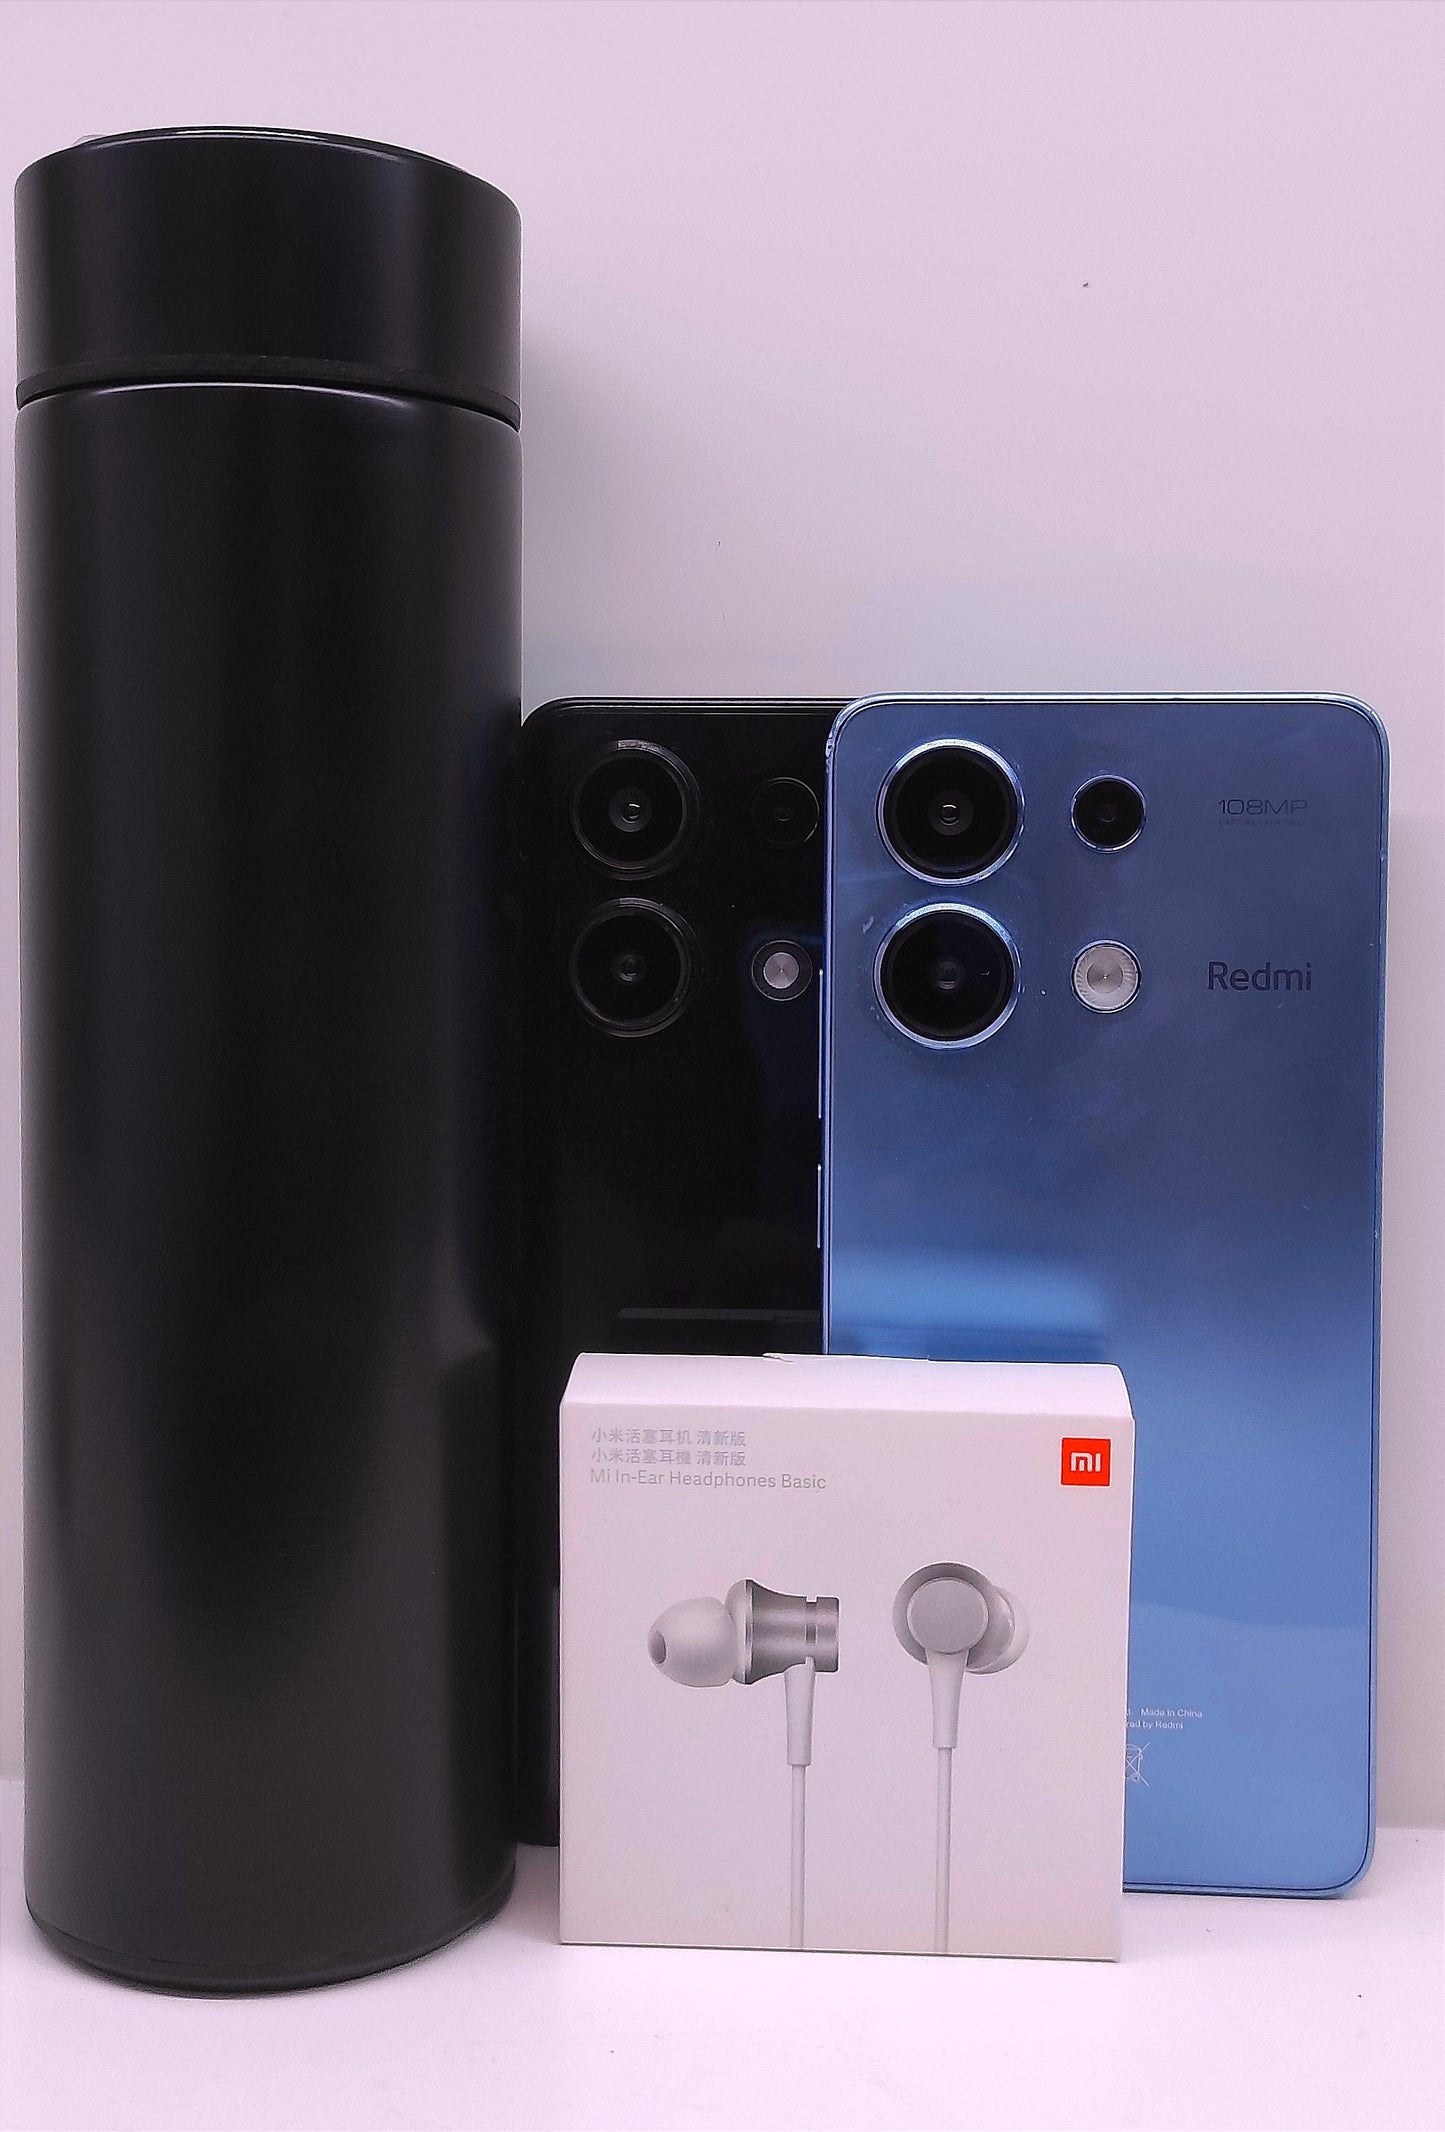 NEW REDMI NOTE 13 PRO 8+256/AMOLED DISPLAY/200MP REAR CAMERA/ON SCREENPRINT/25 MONTHS WARRANT/FREE MI IN EARPHONES - XIAOMI HOME KENYA OFFICIAL AUTHORIZED STORE